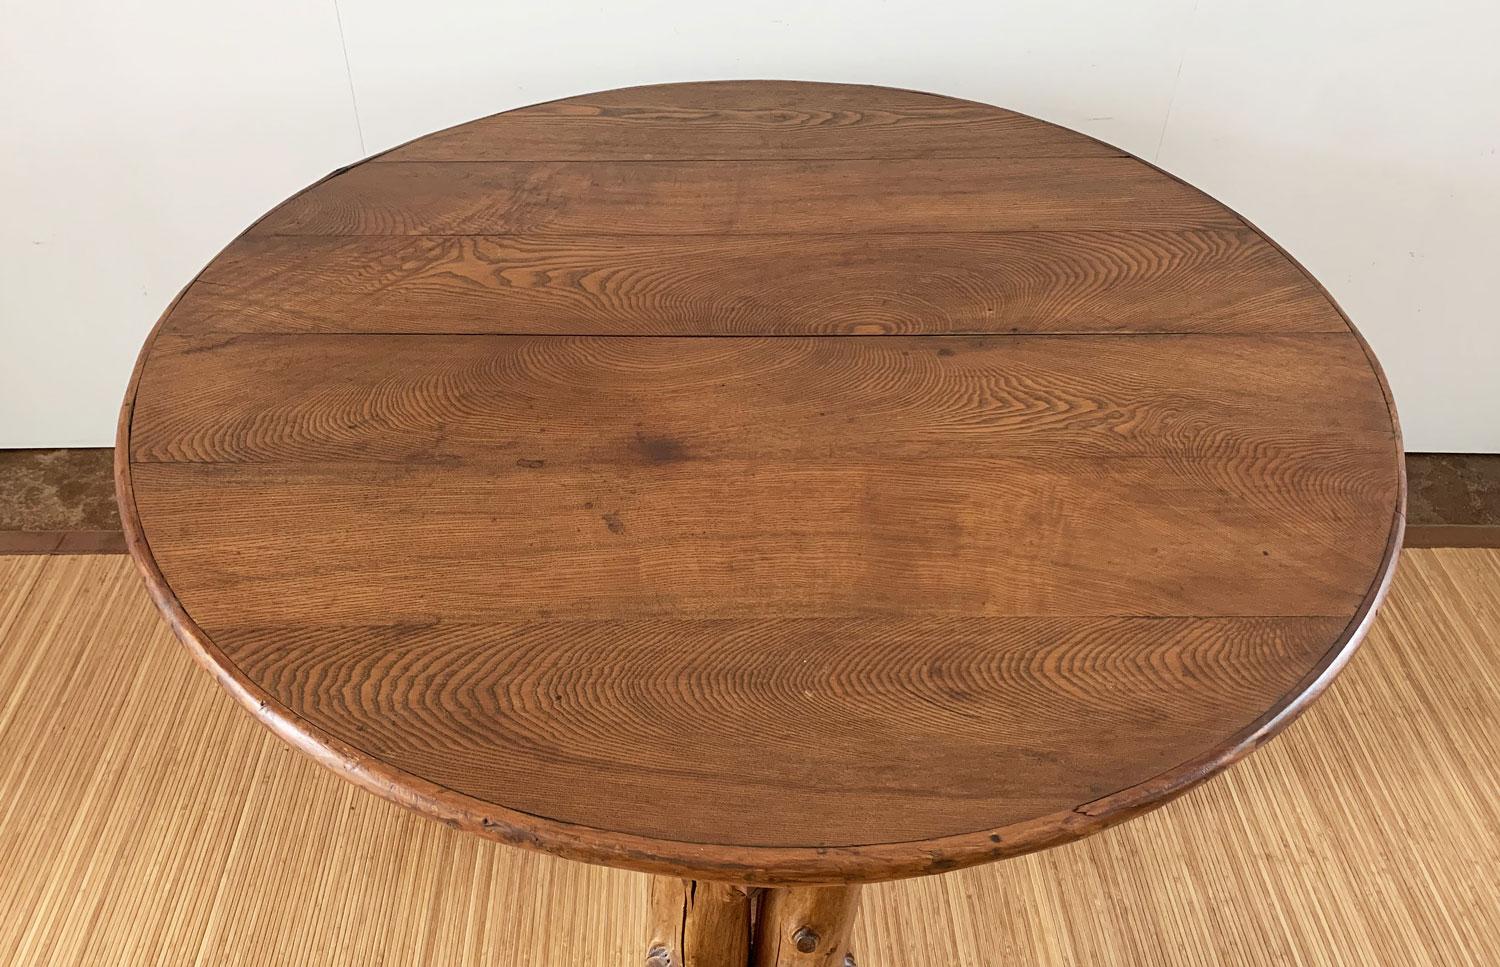 This one-of-a-kind round table has a quintessential rustic design with a cedar peeled pole base and an ash board top wrapped with peeled cedar edging. Beneath the top, the apron is embellished with applied cedar half-rounds. The double cedar pole